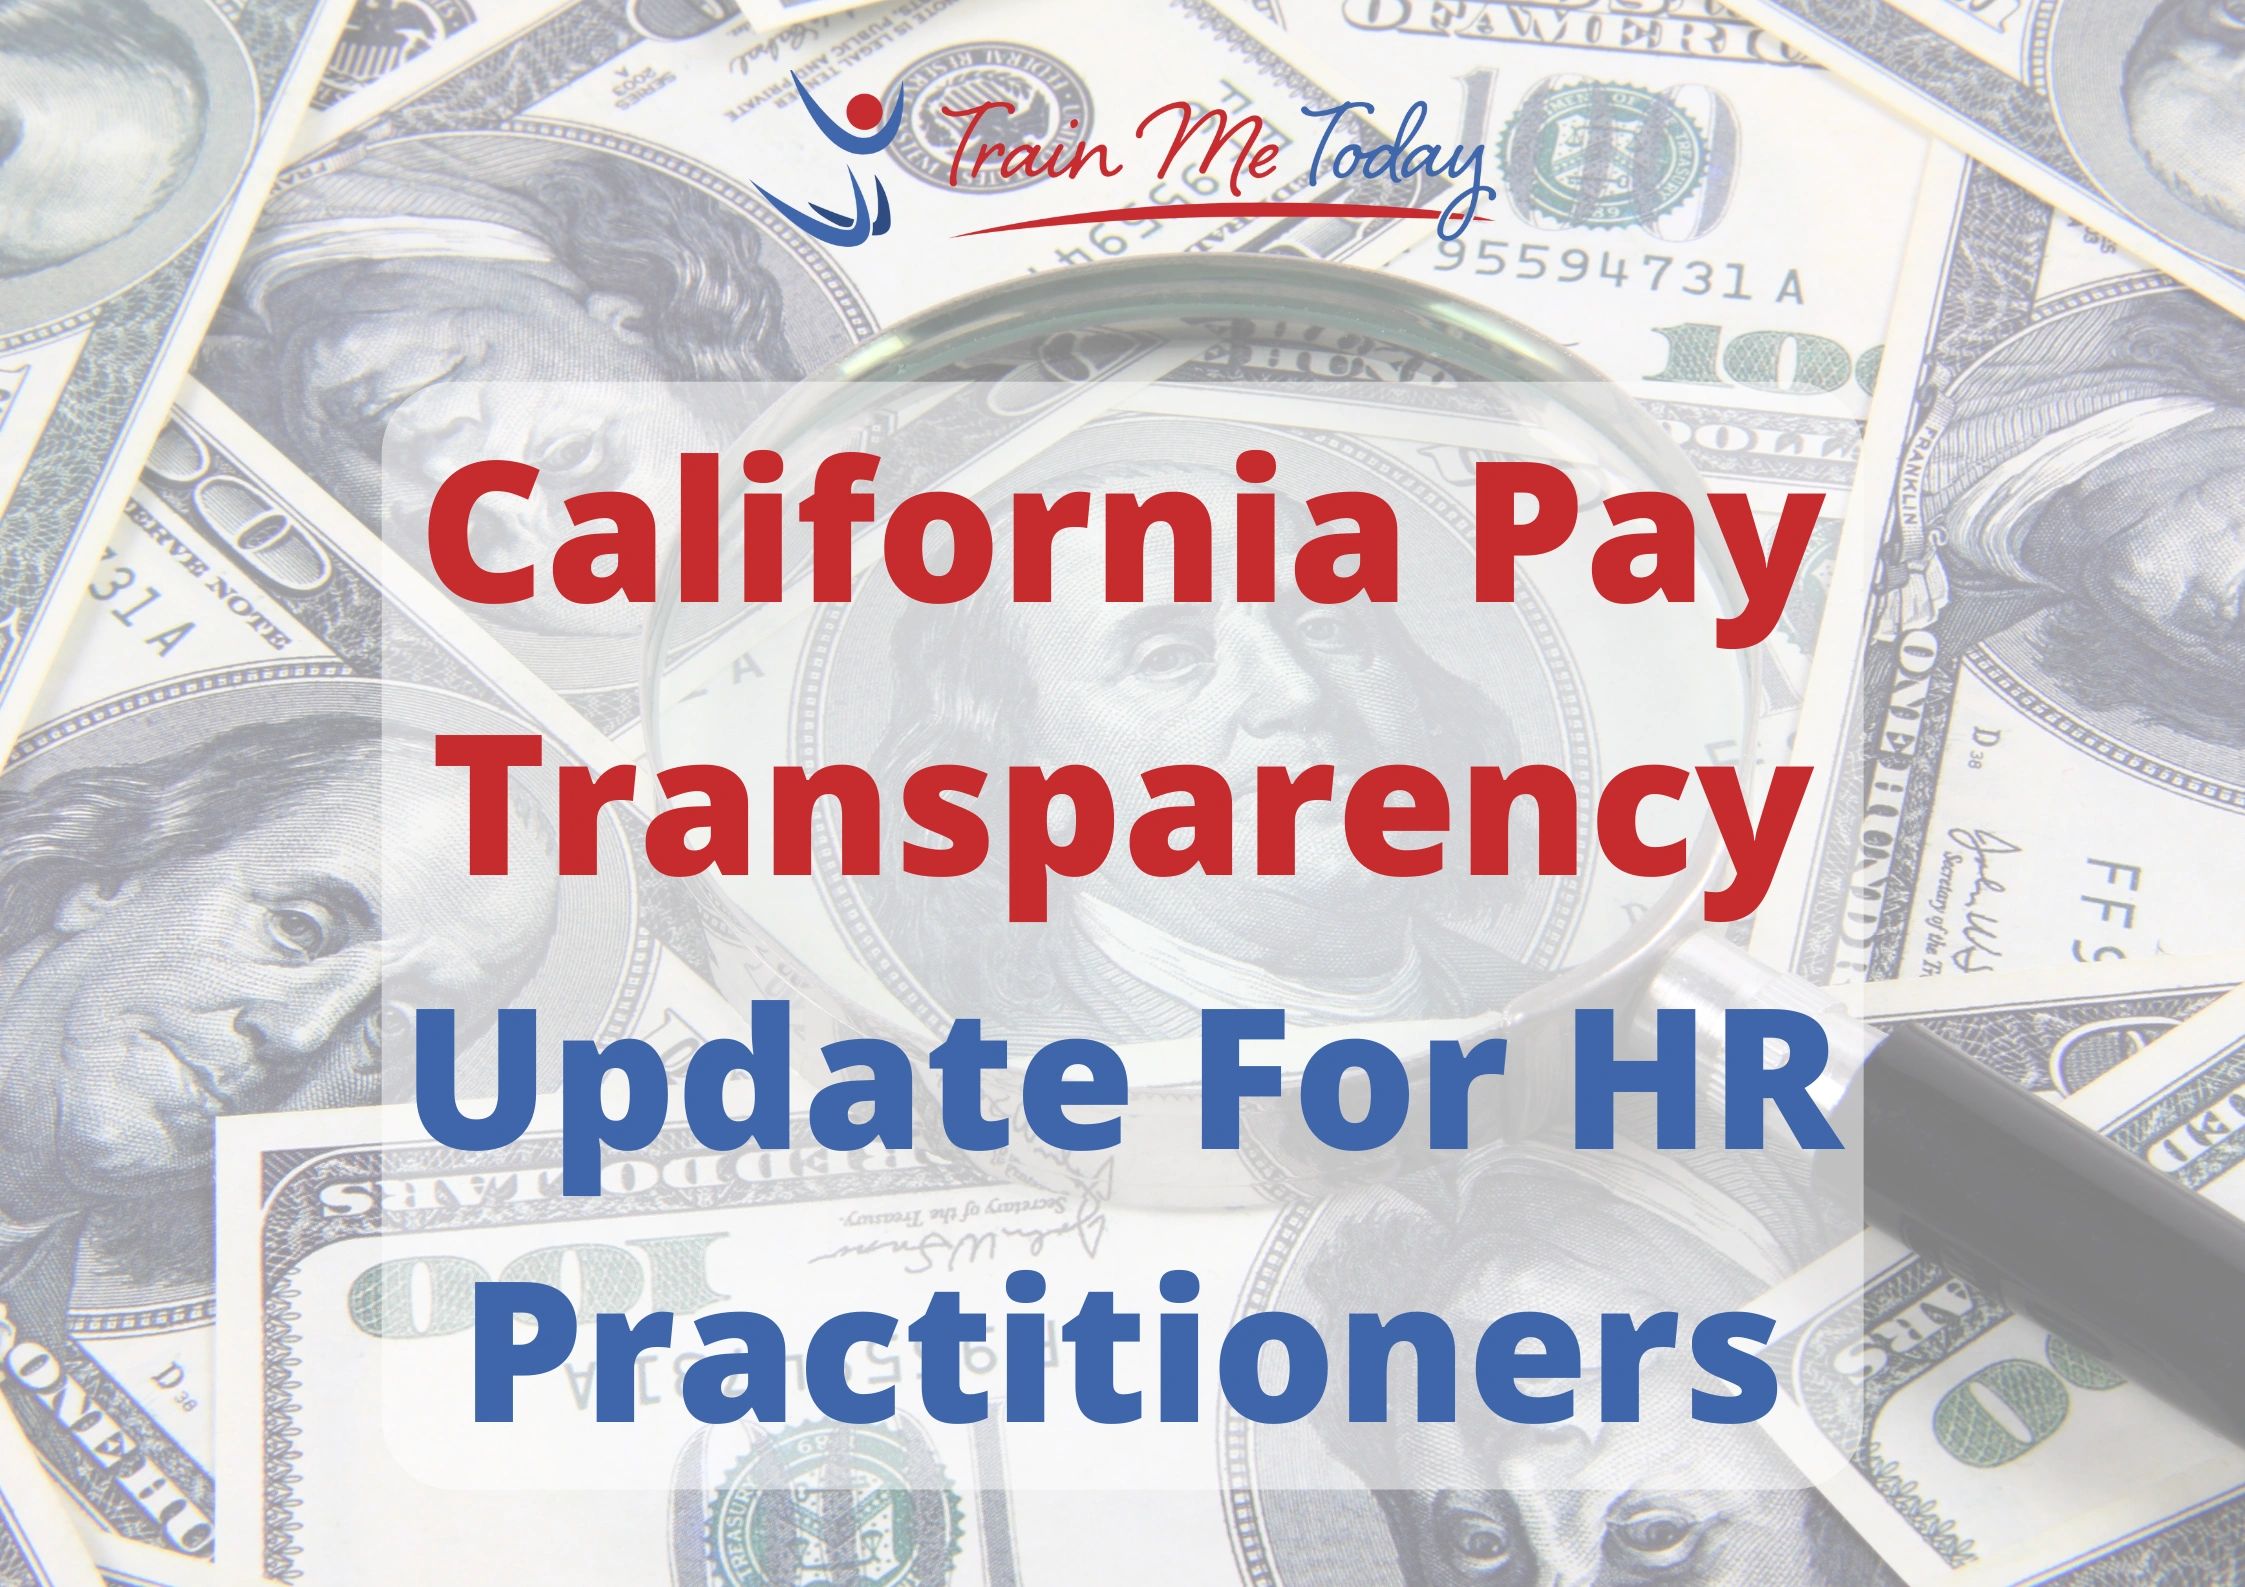 California Pay Transparency Update For HR Practitioners